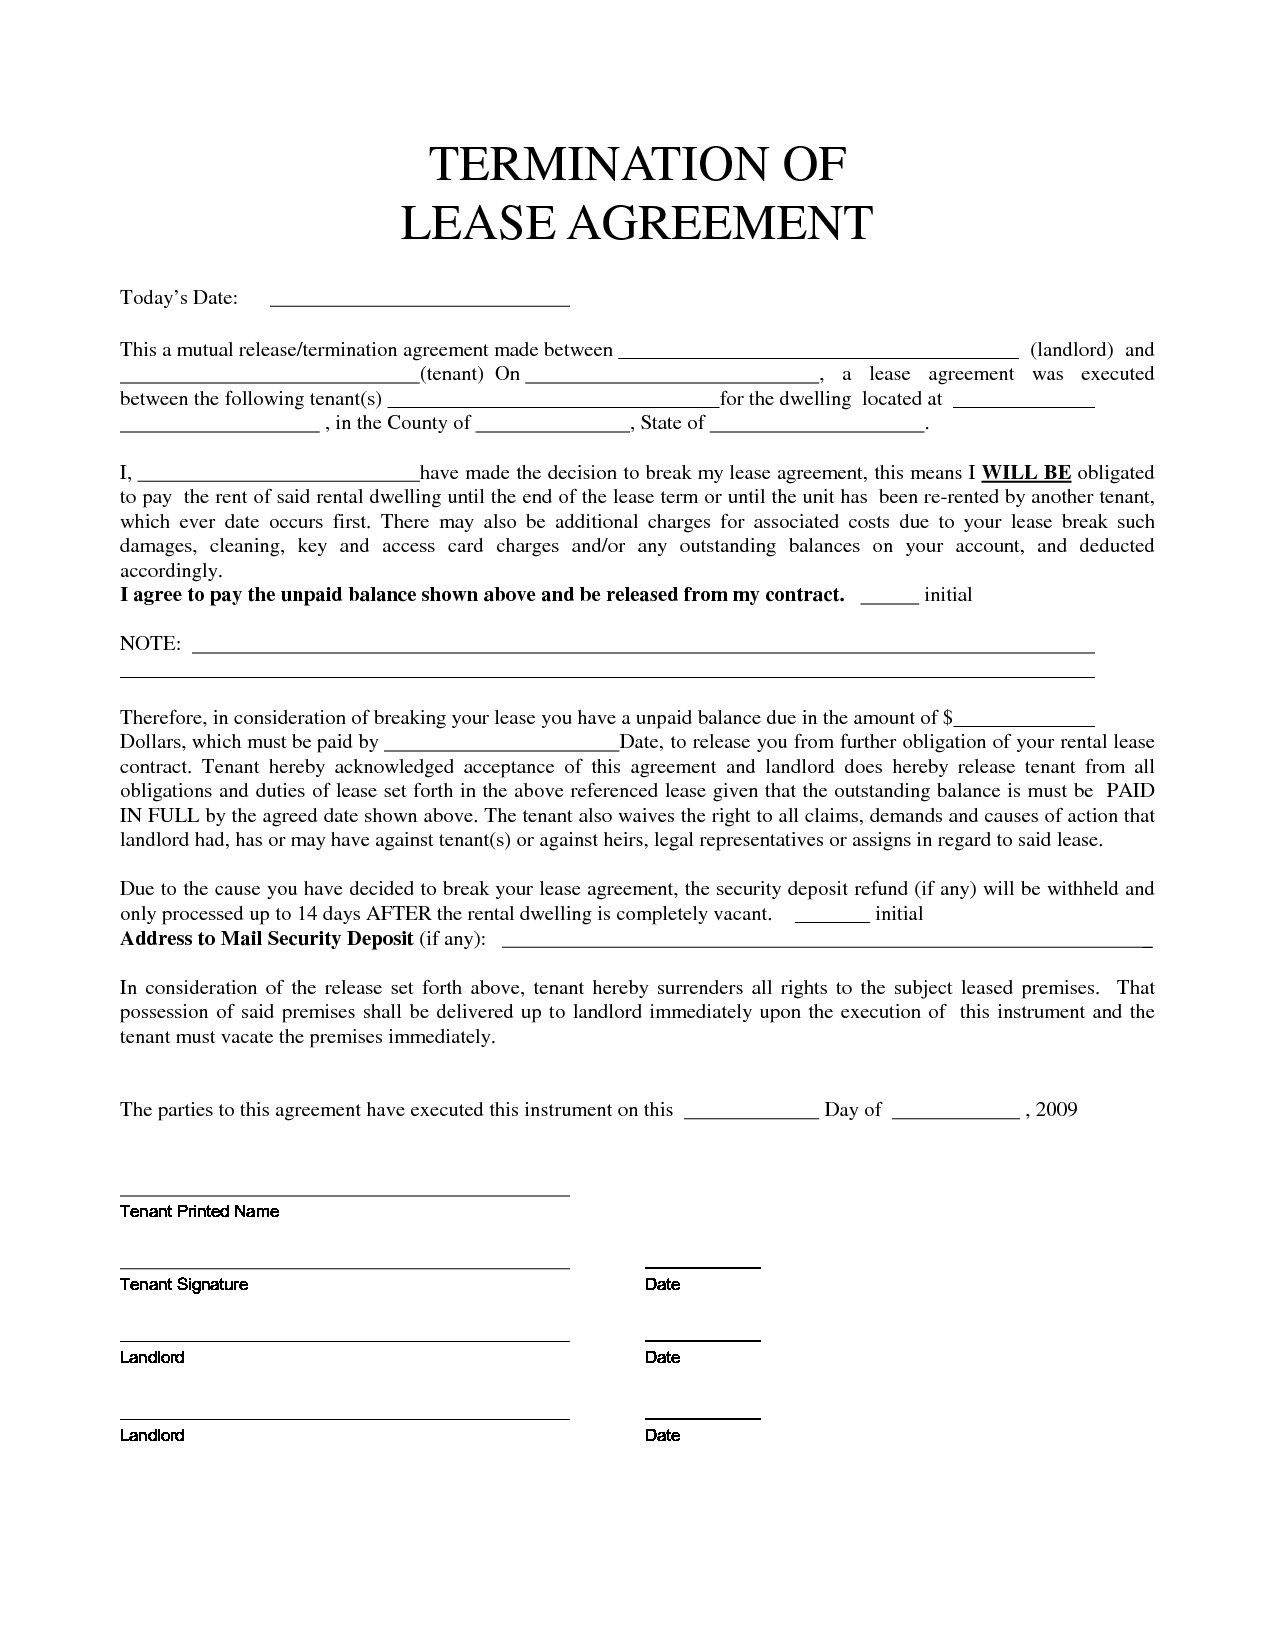 termination-of-lease-agreement-form-free-printable-documents